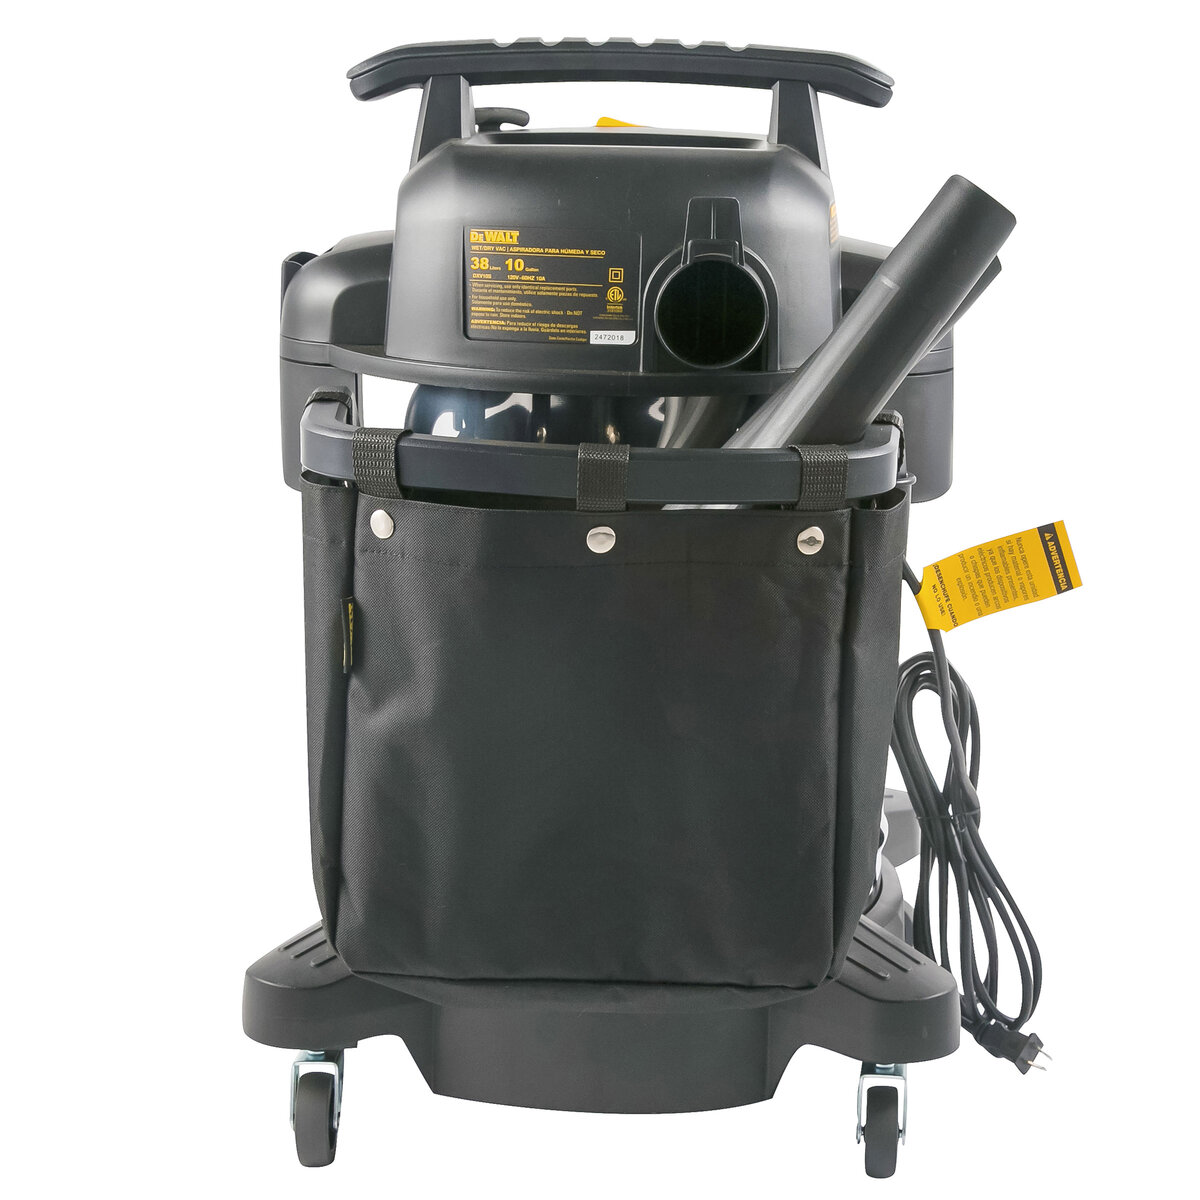 Cut out image of dewalt wet and dry vac